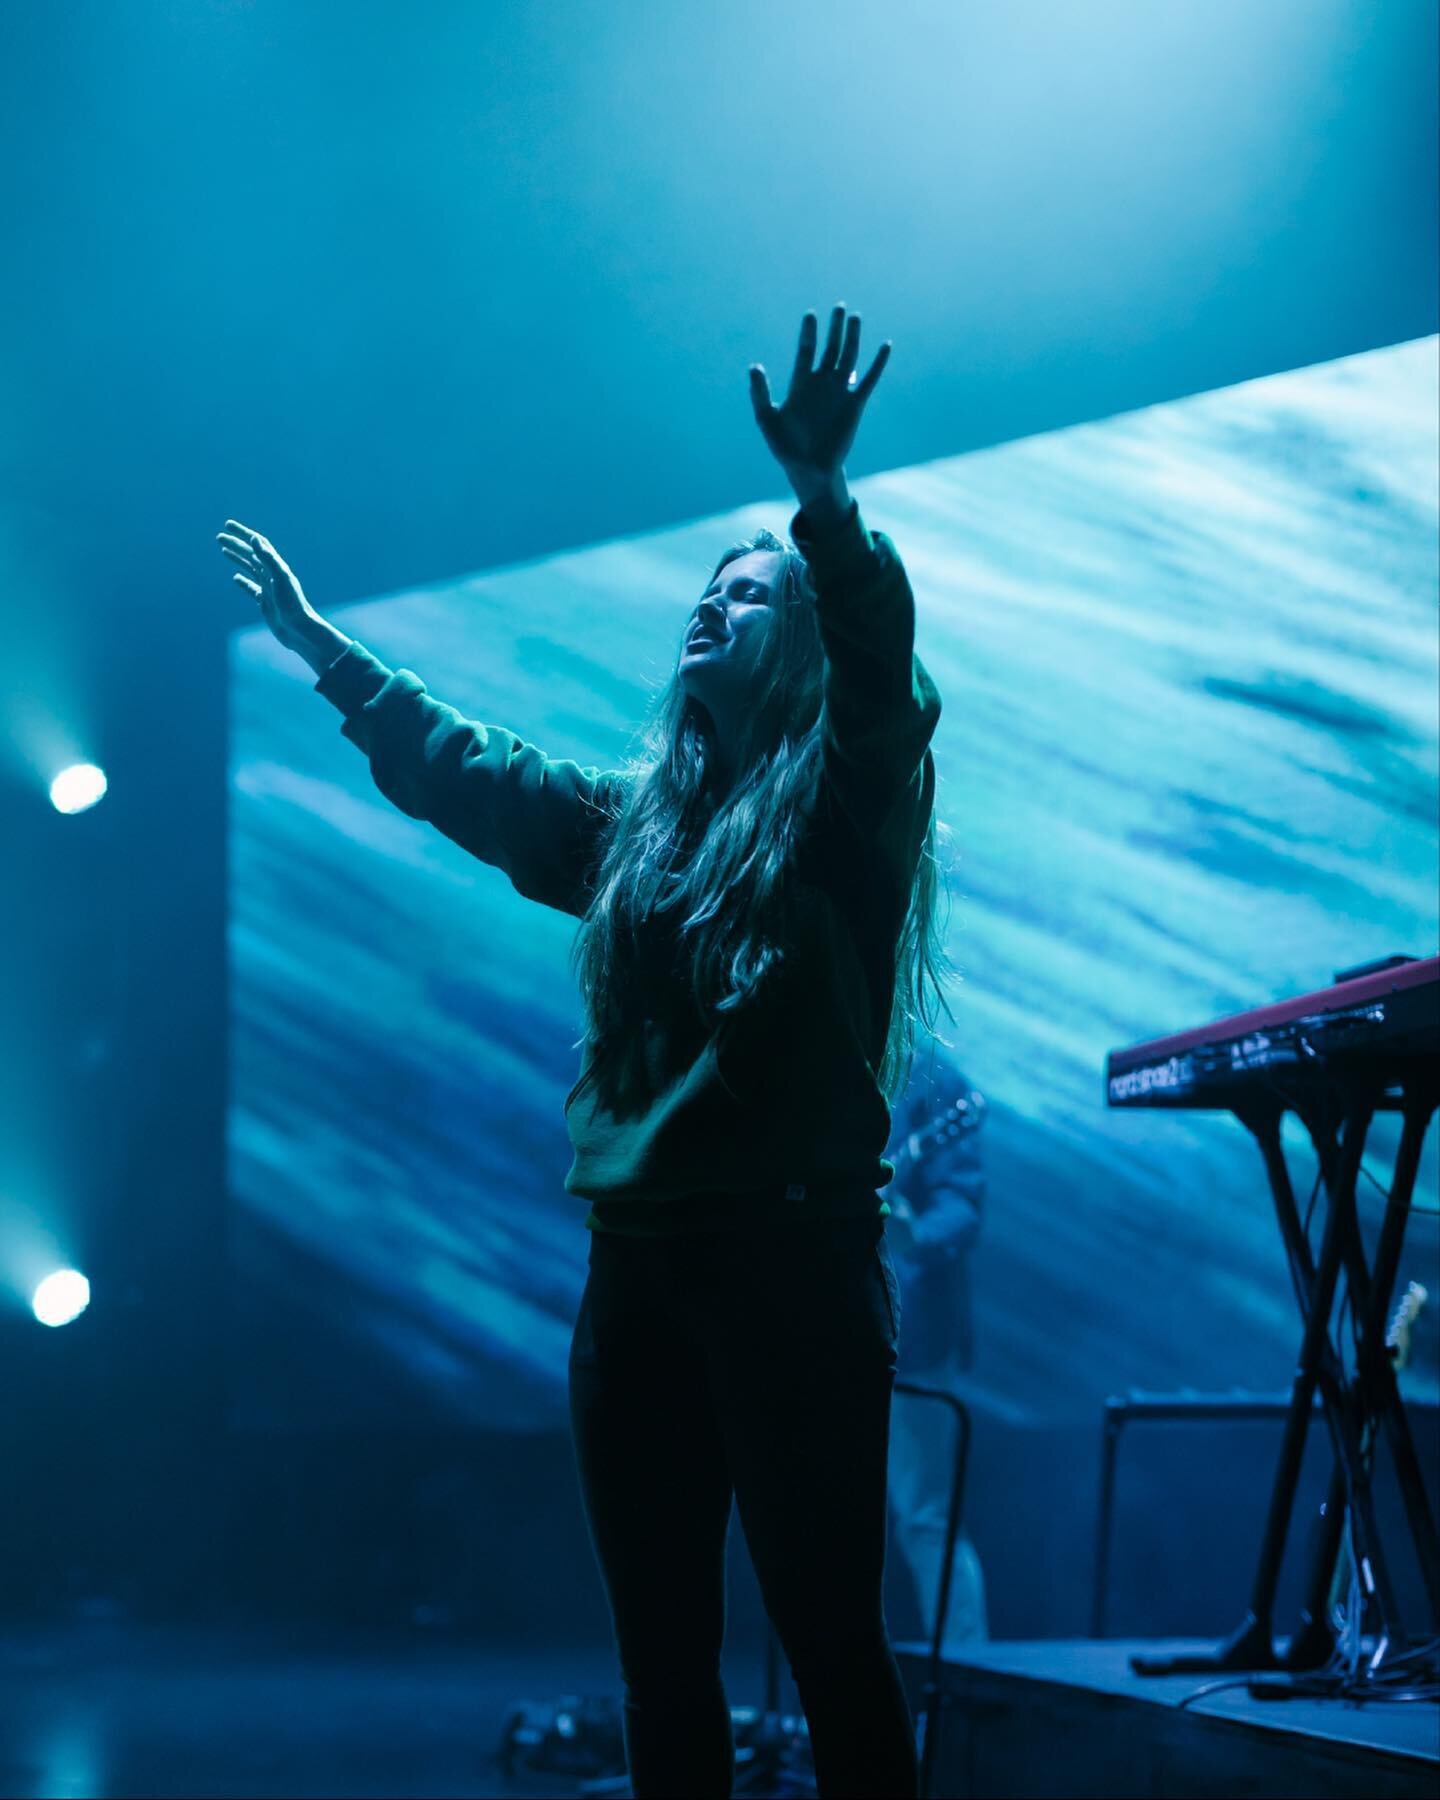 CONFERENCE CONFERENCE CONFERENCE

Tonight&rsquo;s the night! Our Worship &amp; Creative Conference begins at 7pm with @amandalindseycook and @nathanfinochio ! 

And there&rsquo;s still time to register! Purchase tickets at the link in bio or buy them